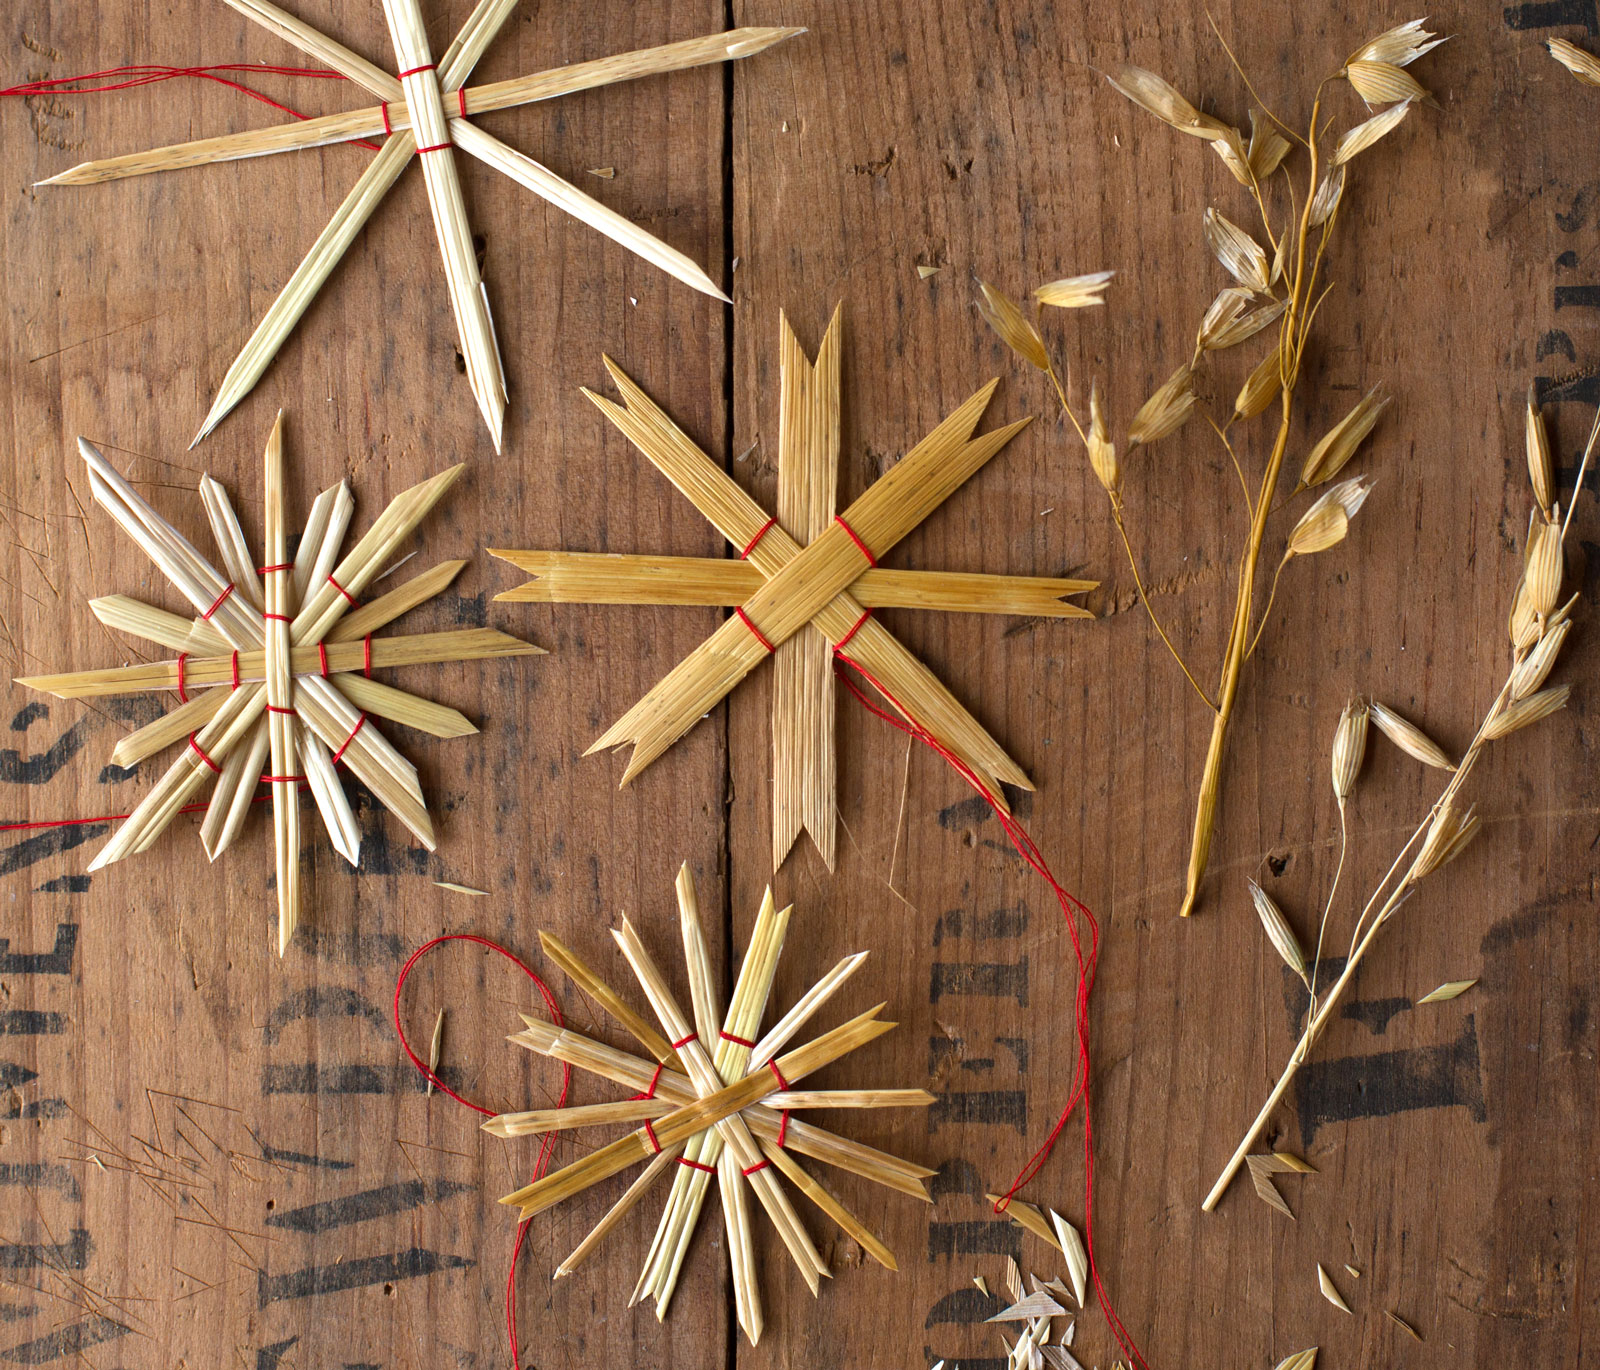 Quick Drinking Straw Starburst Ornaments, Perfect For So Many